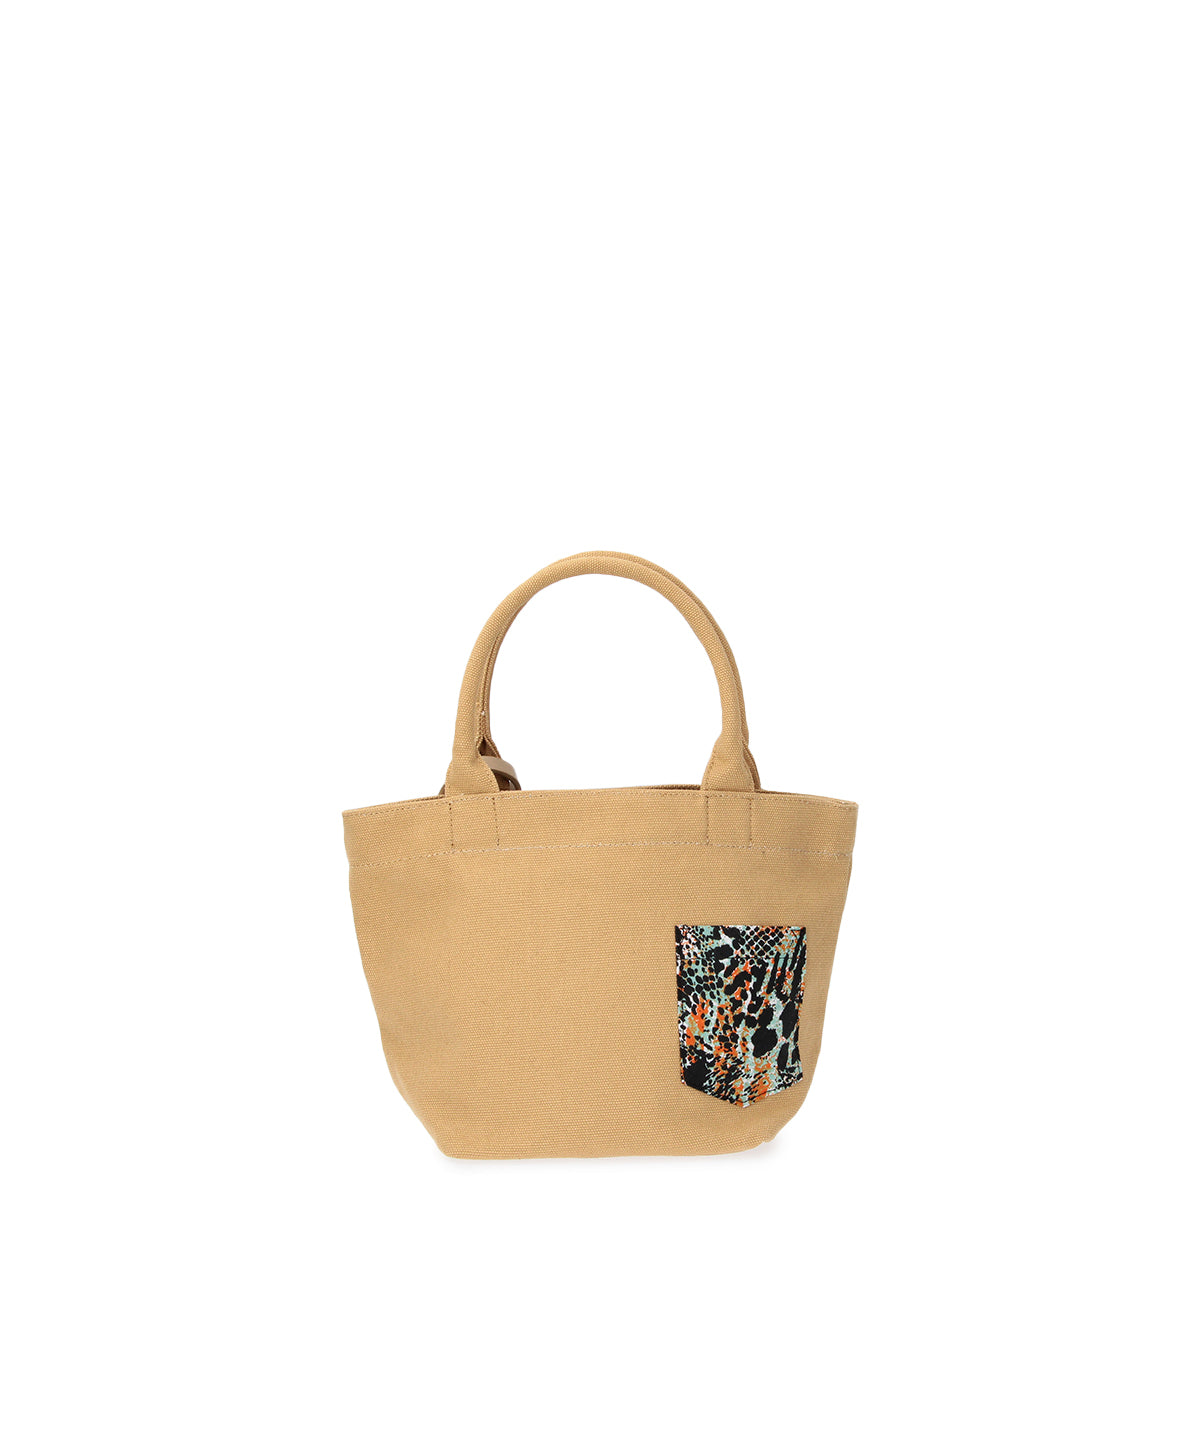 Colored Canvas Tote (Small) BEIGE | バッグ | CLOUDY公式通販サイト